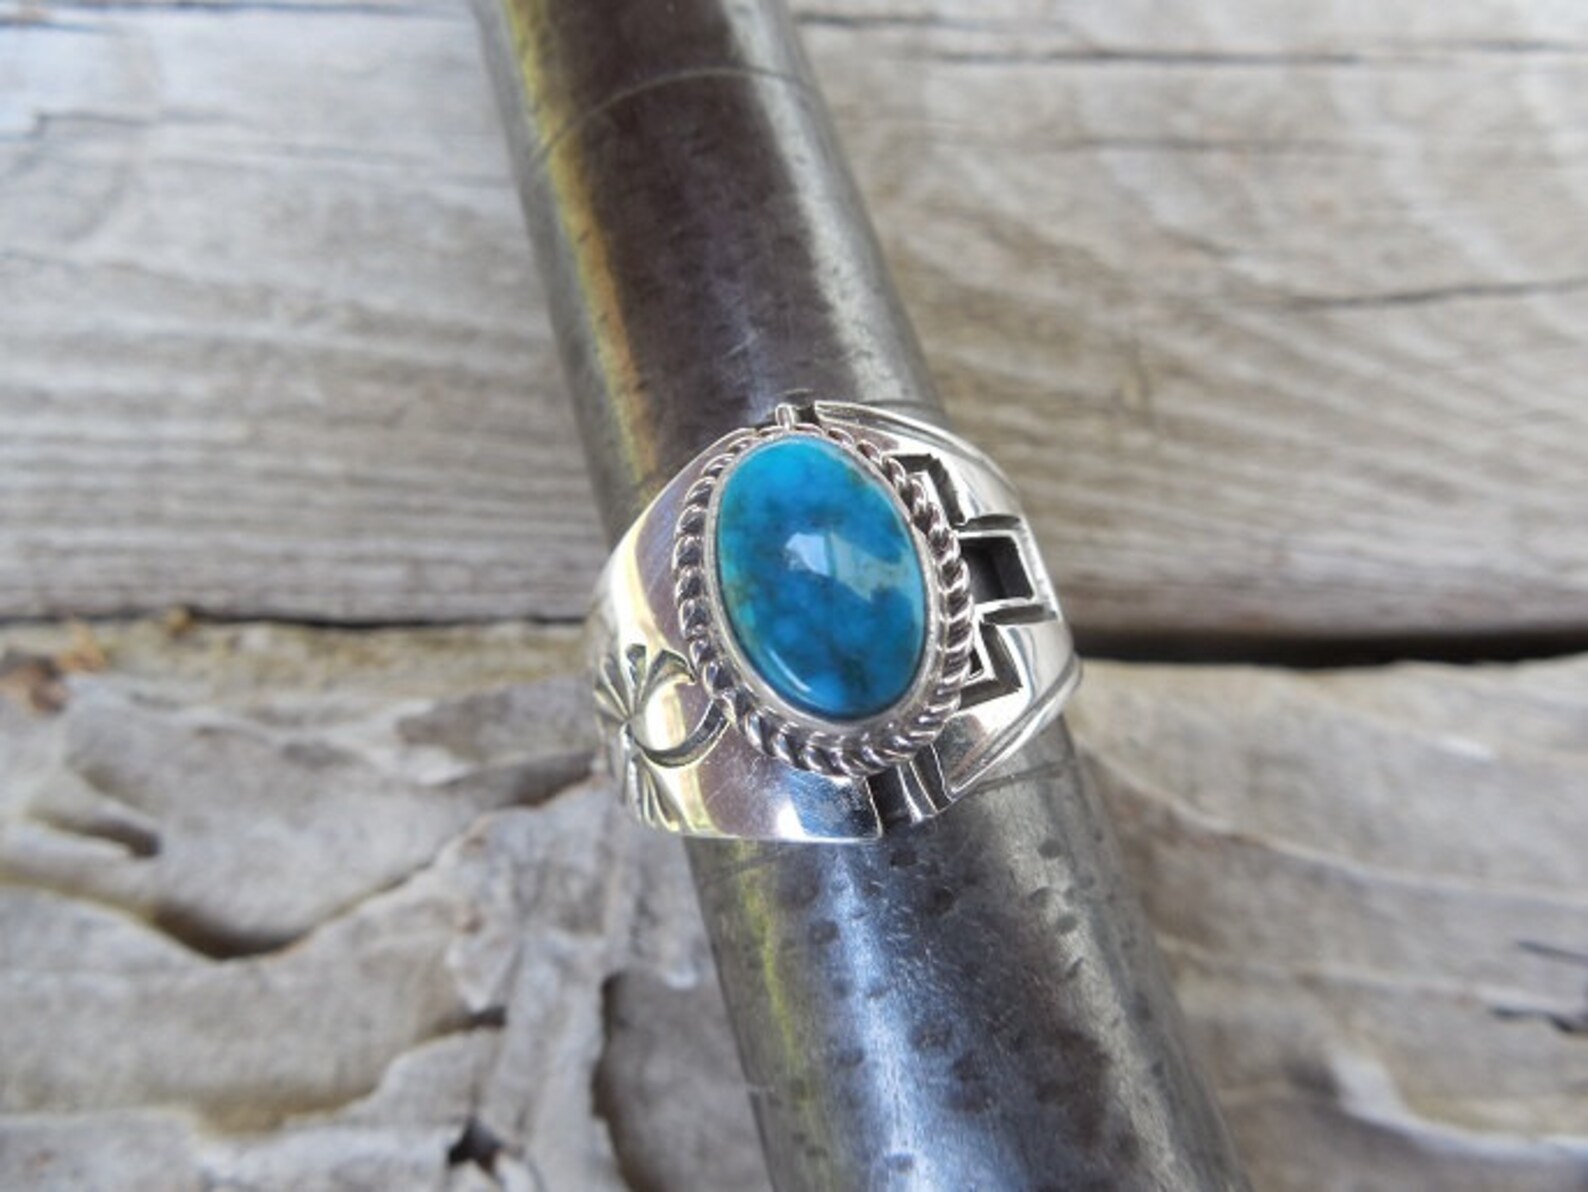 ON SALE Turquoise ring handmade in sterling silver by an | Etsy